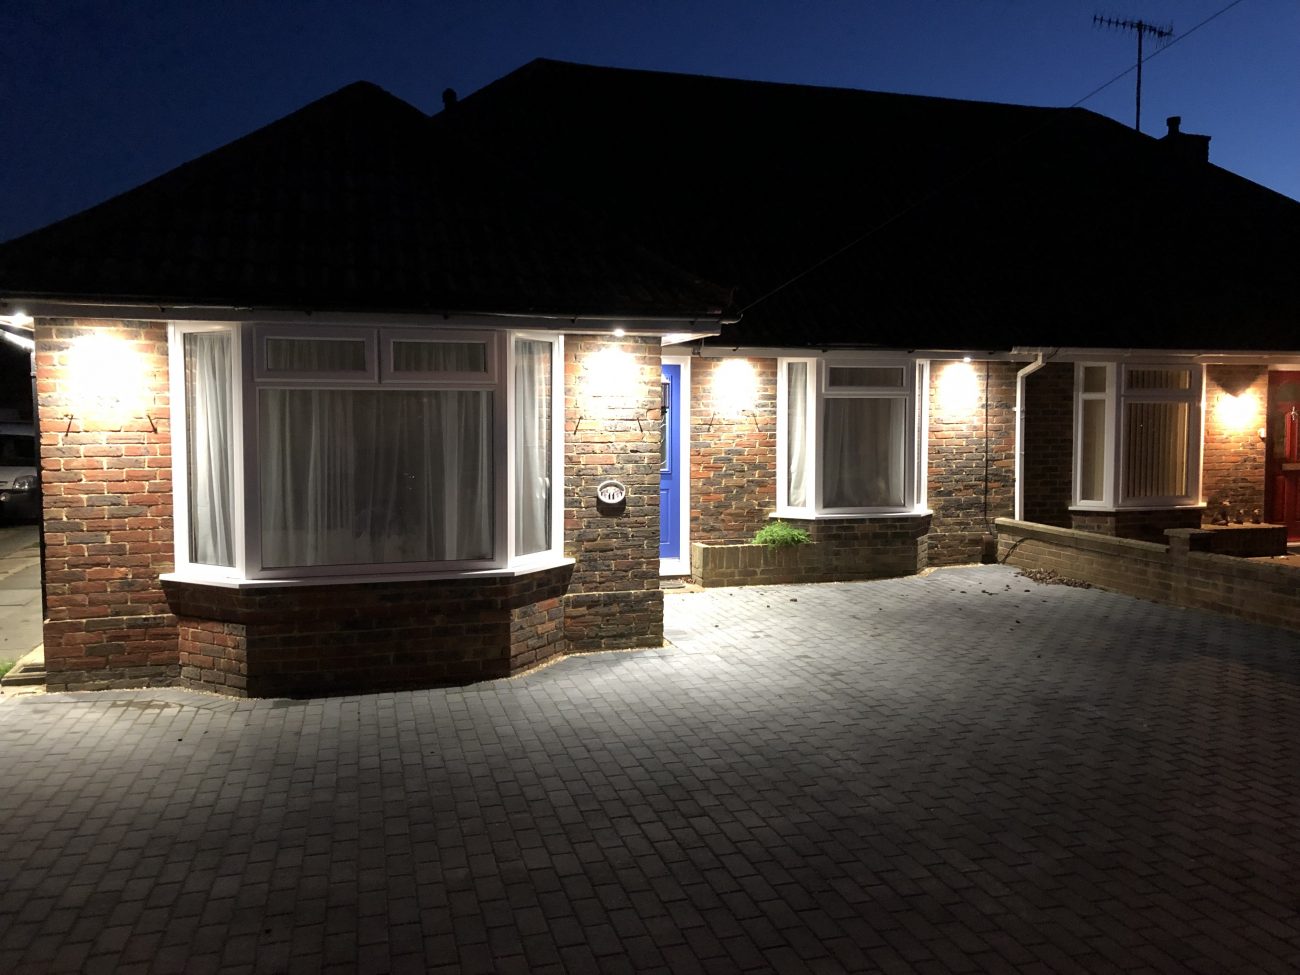 Outside lighting projects